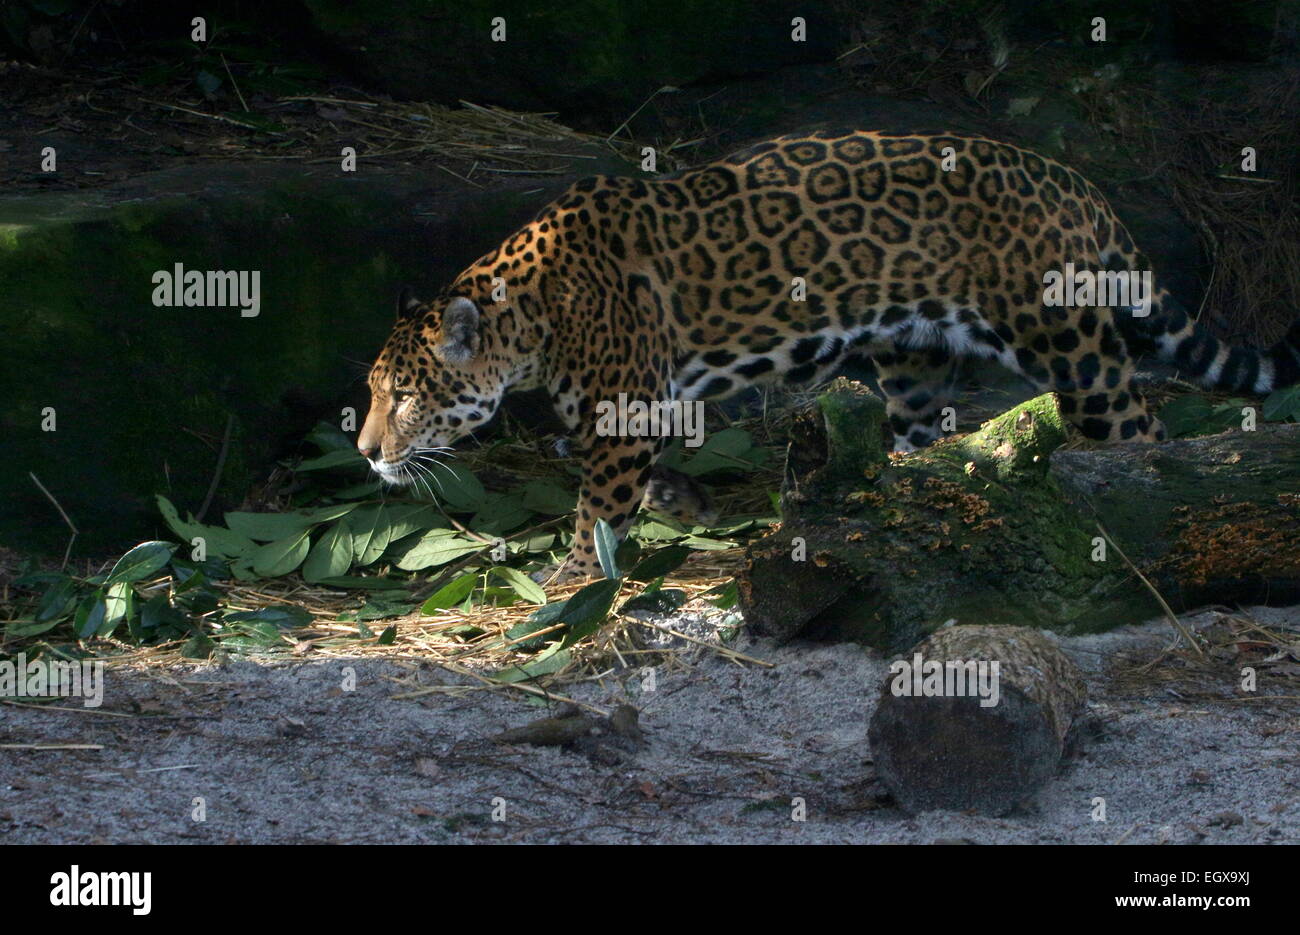 Female South American  Jaguar (Panthera onca) walking in a shady forest setting Stock Photo